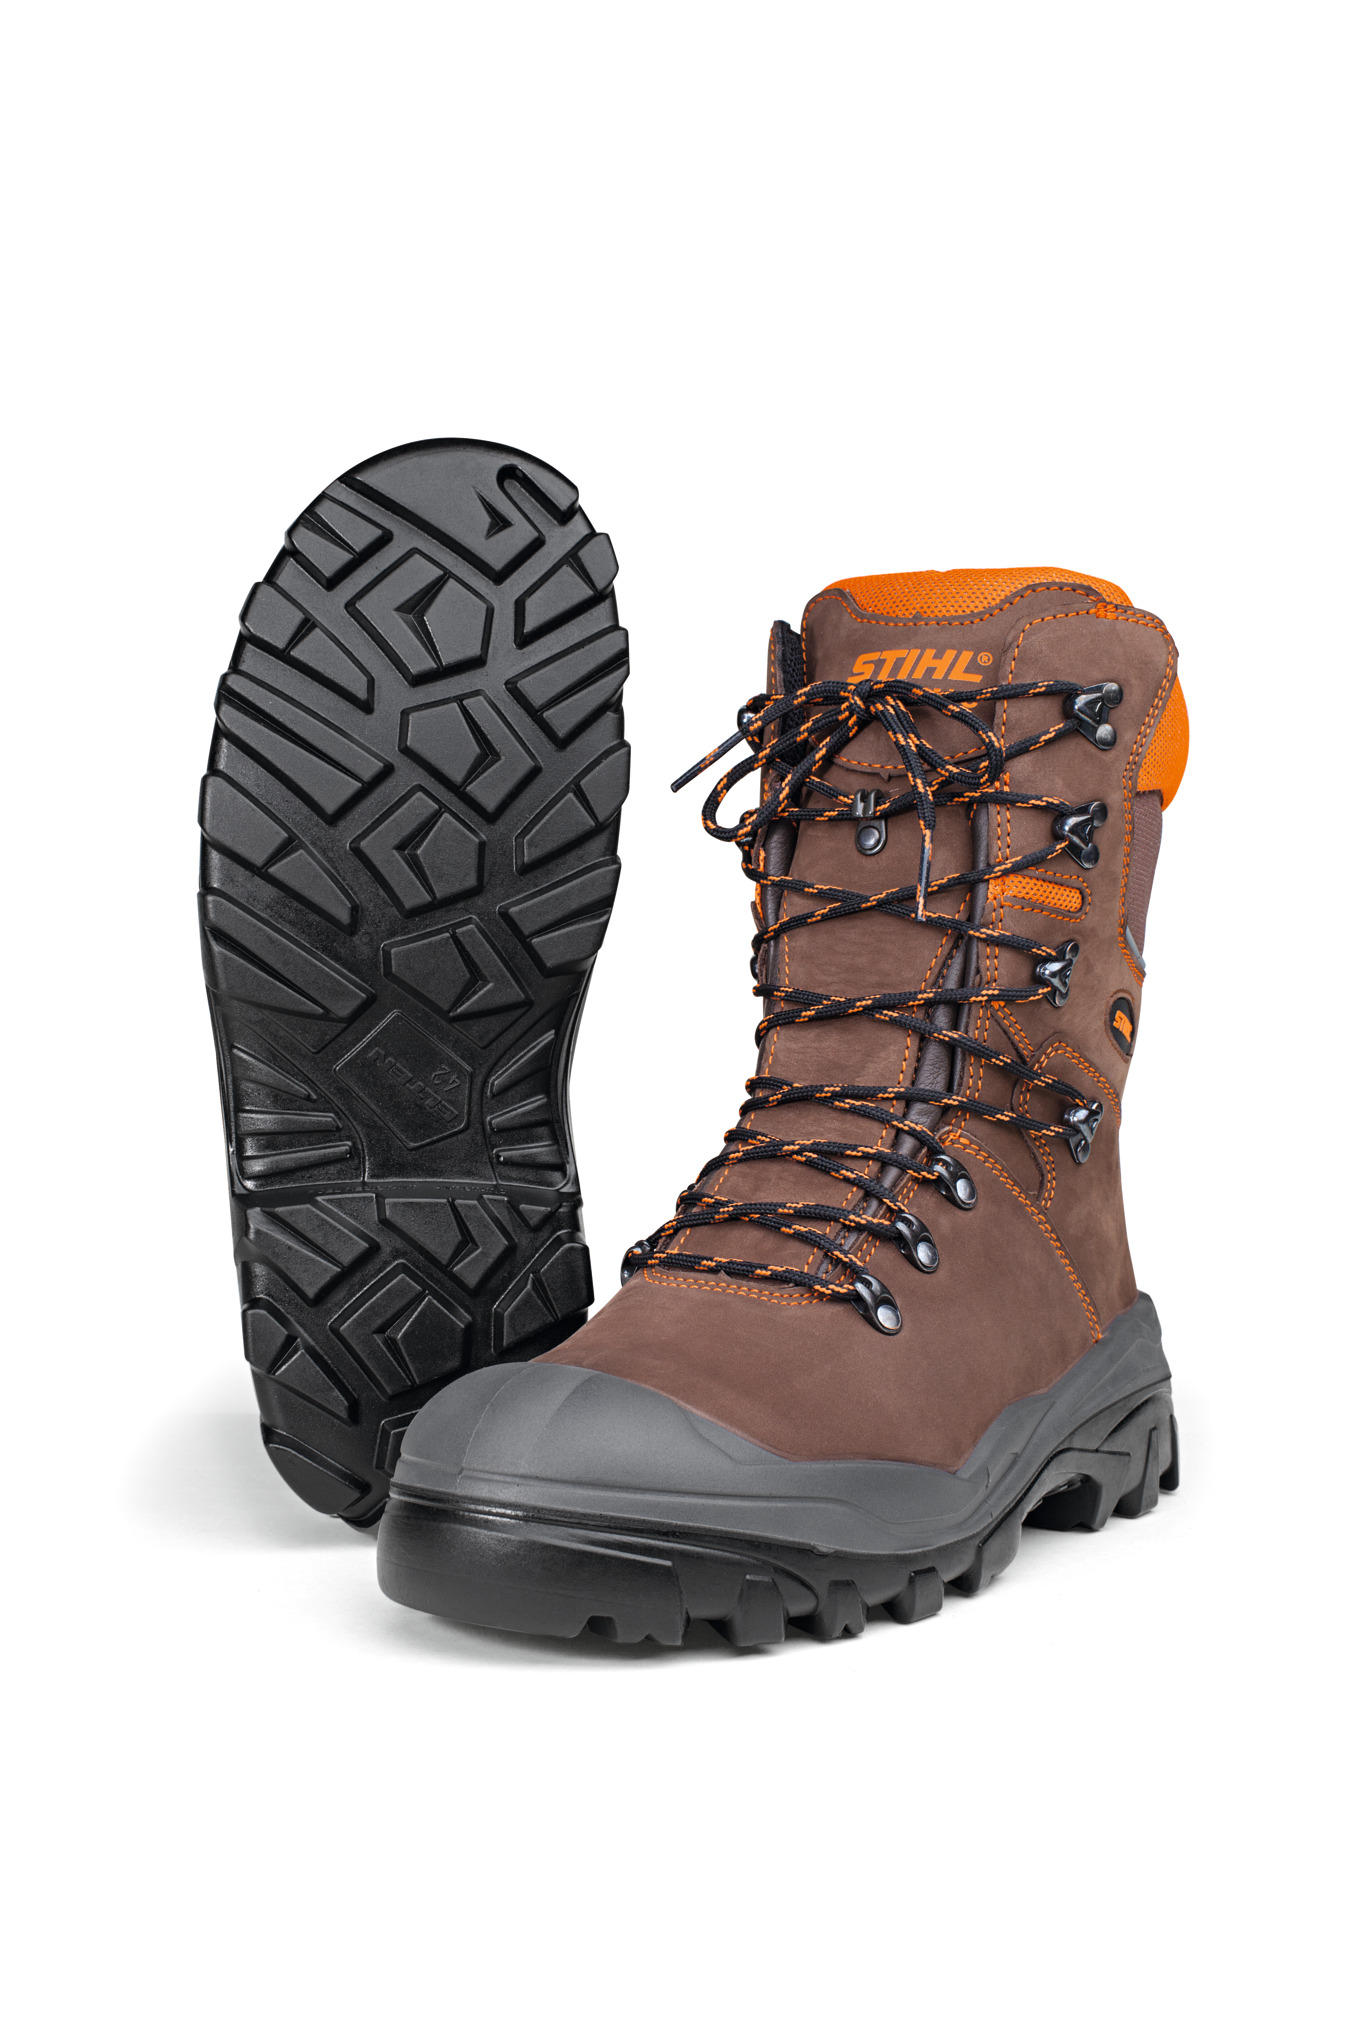 DYNAMIC S3 Chain saw boots